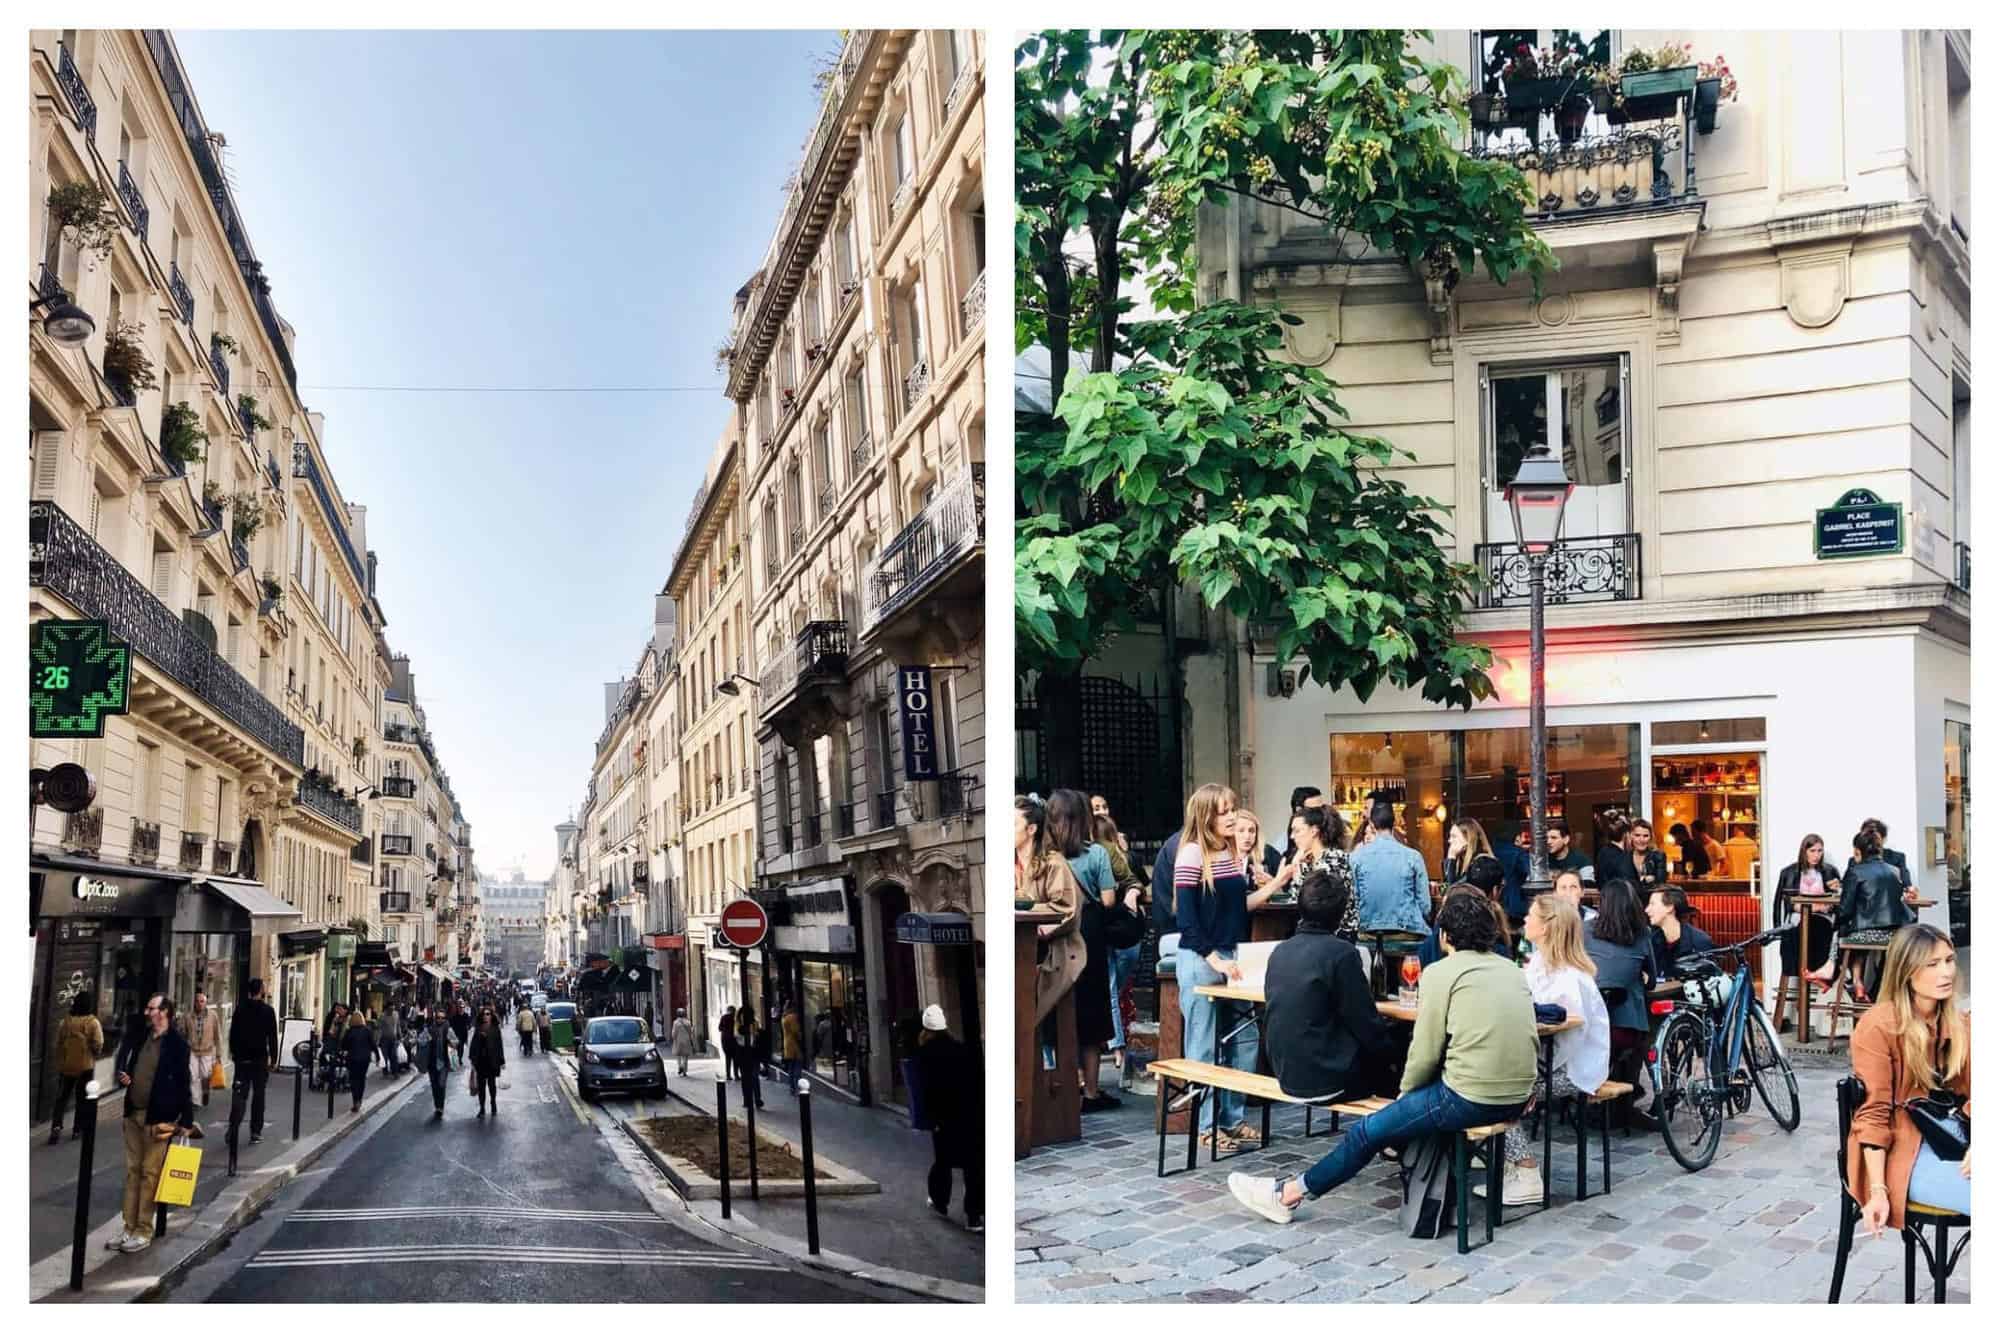 Left: a photo of rue des martyrs in the 9th arrondissement of Paris on a sunny day. Right: a photo of people drinking on a terrace in Pigalle. 